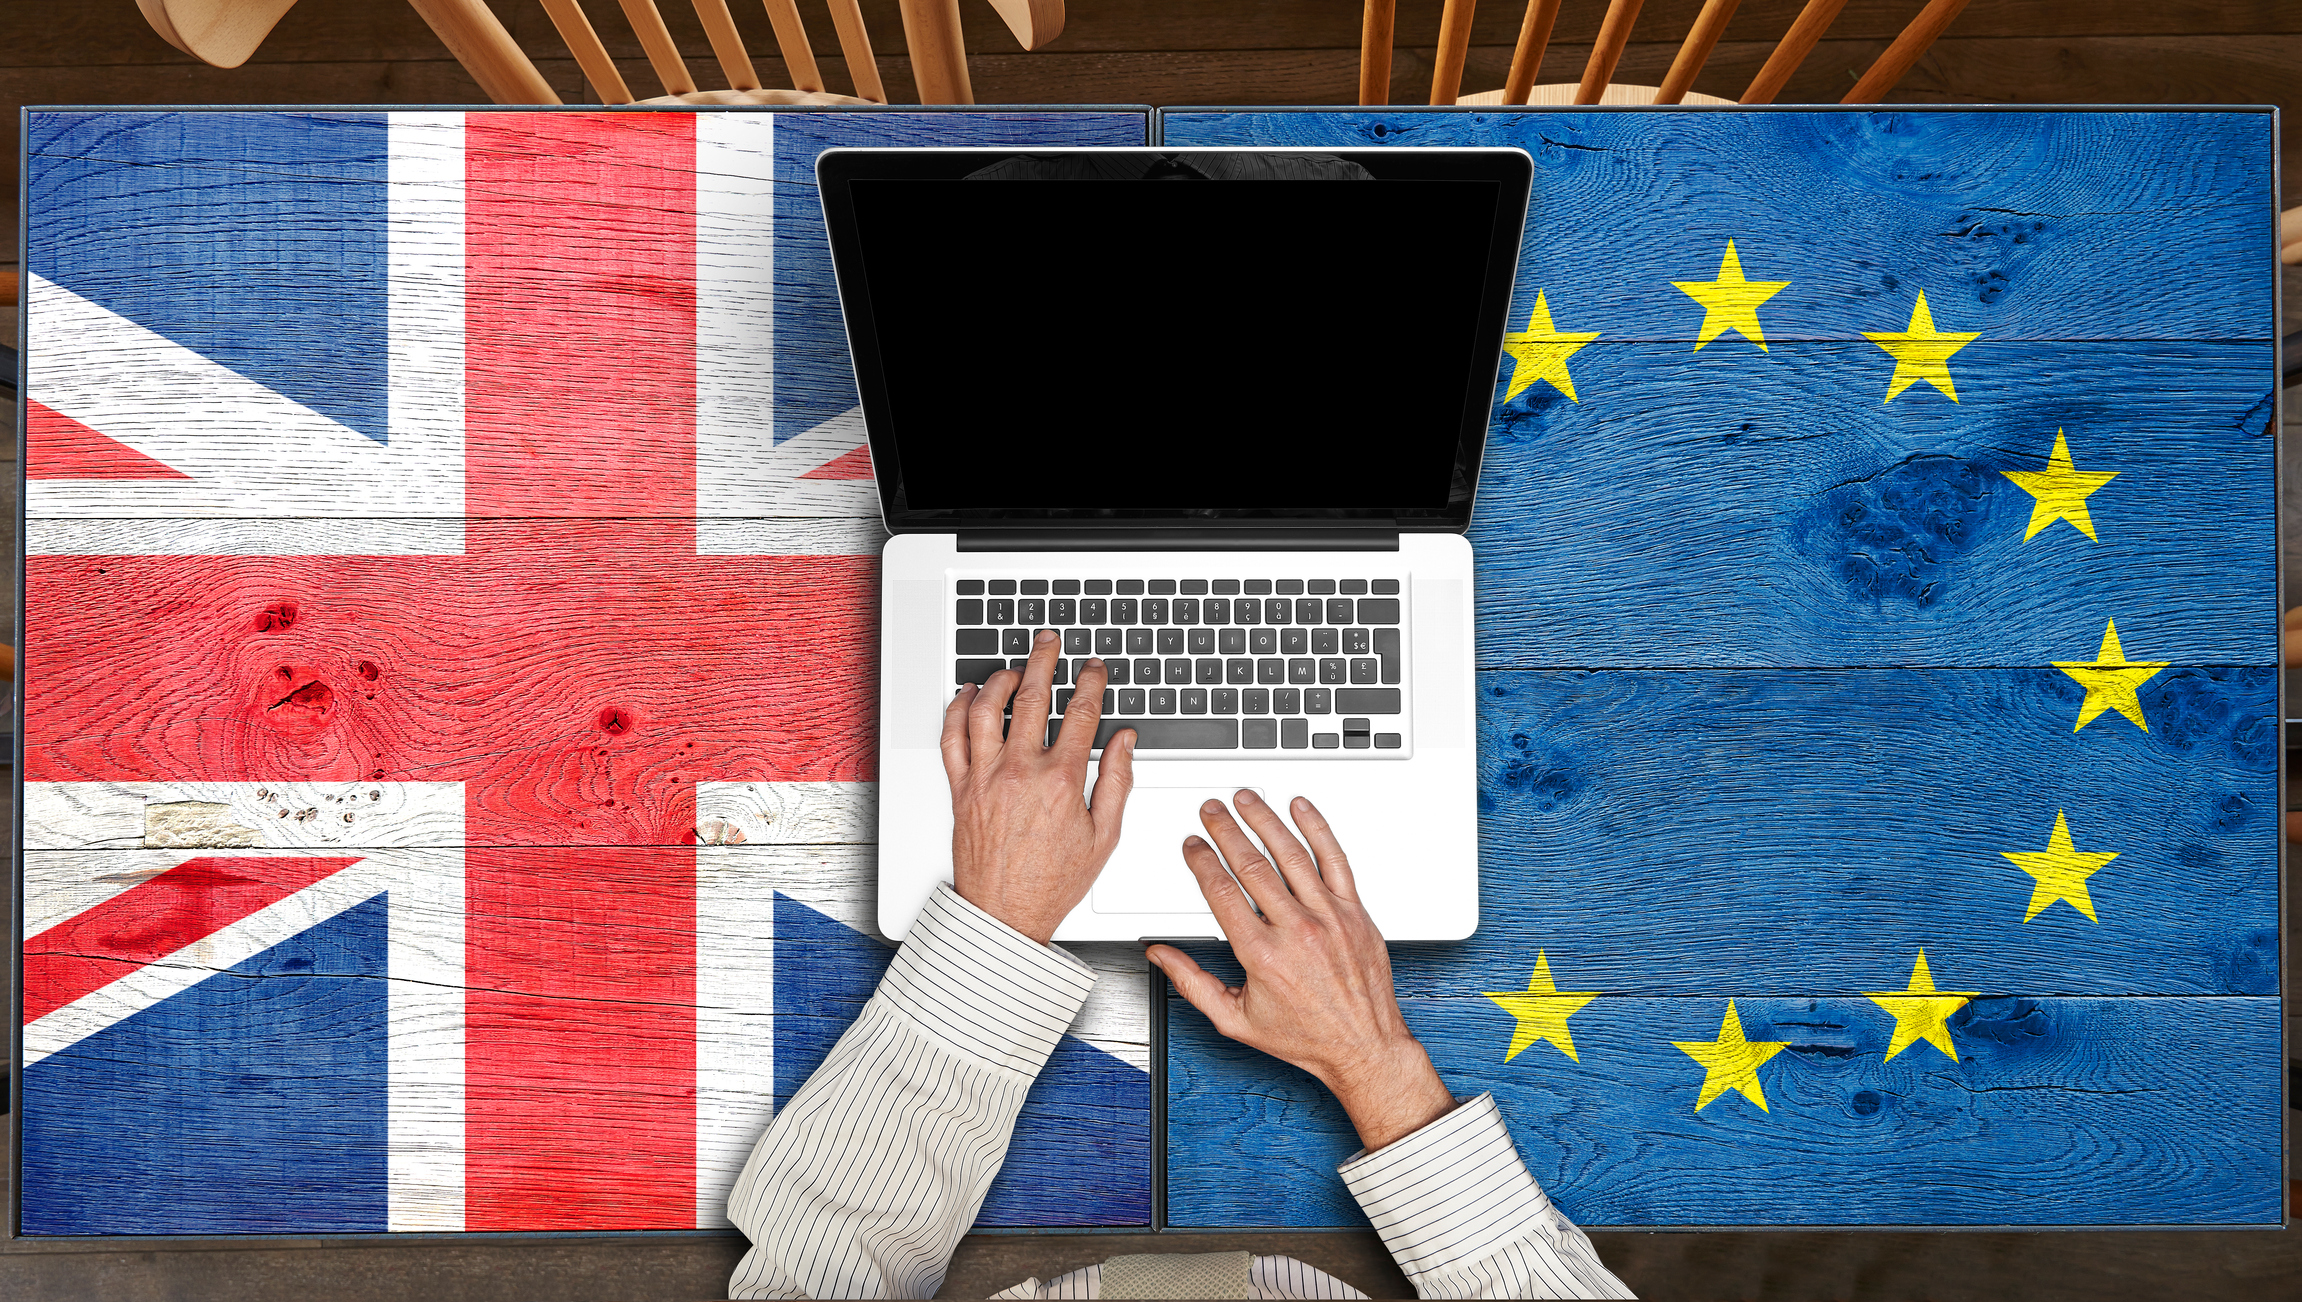 image shows a laptop on top of a Union Jack flag and an EU flag